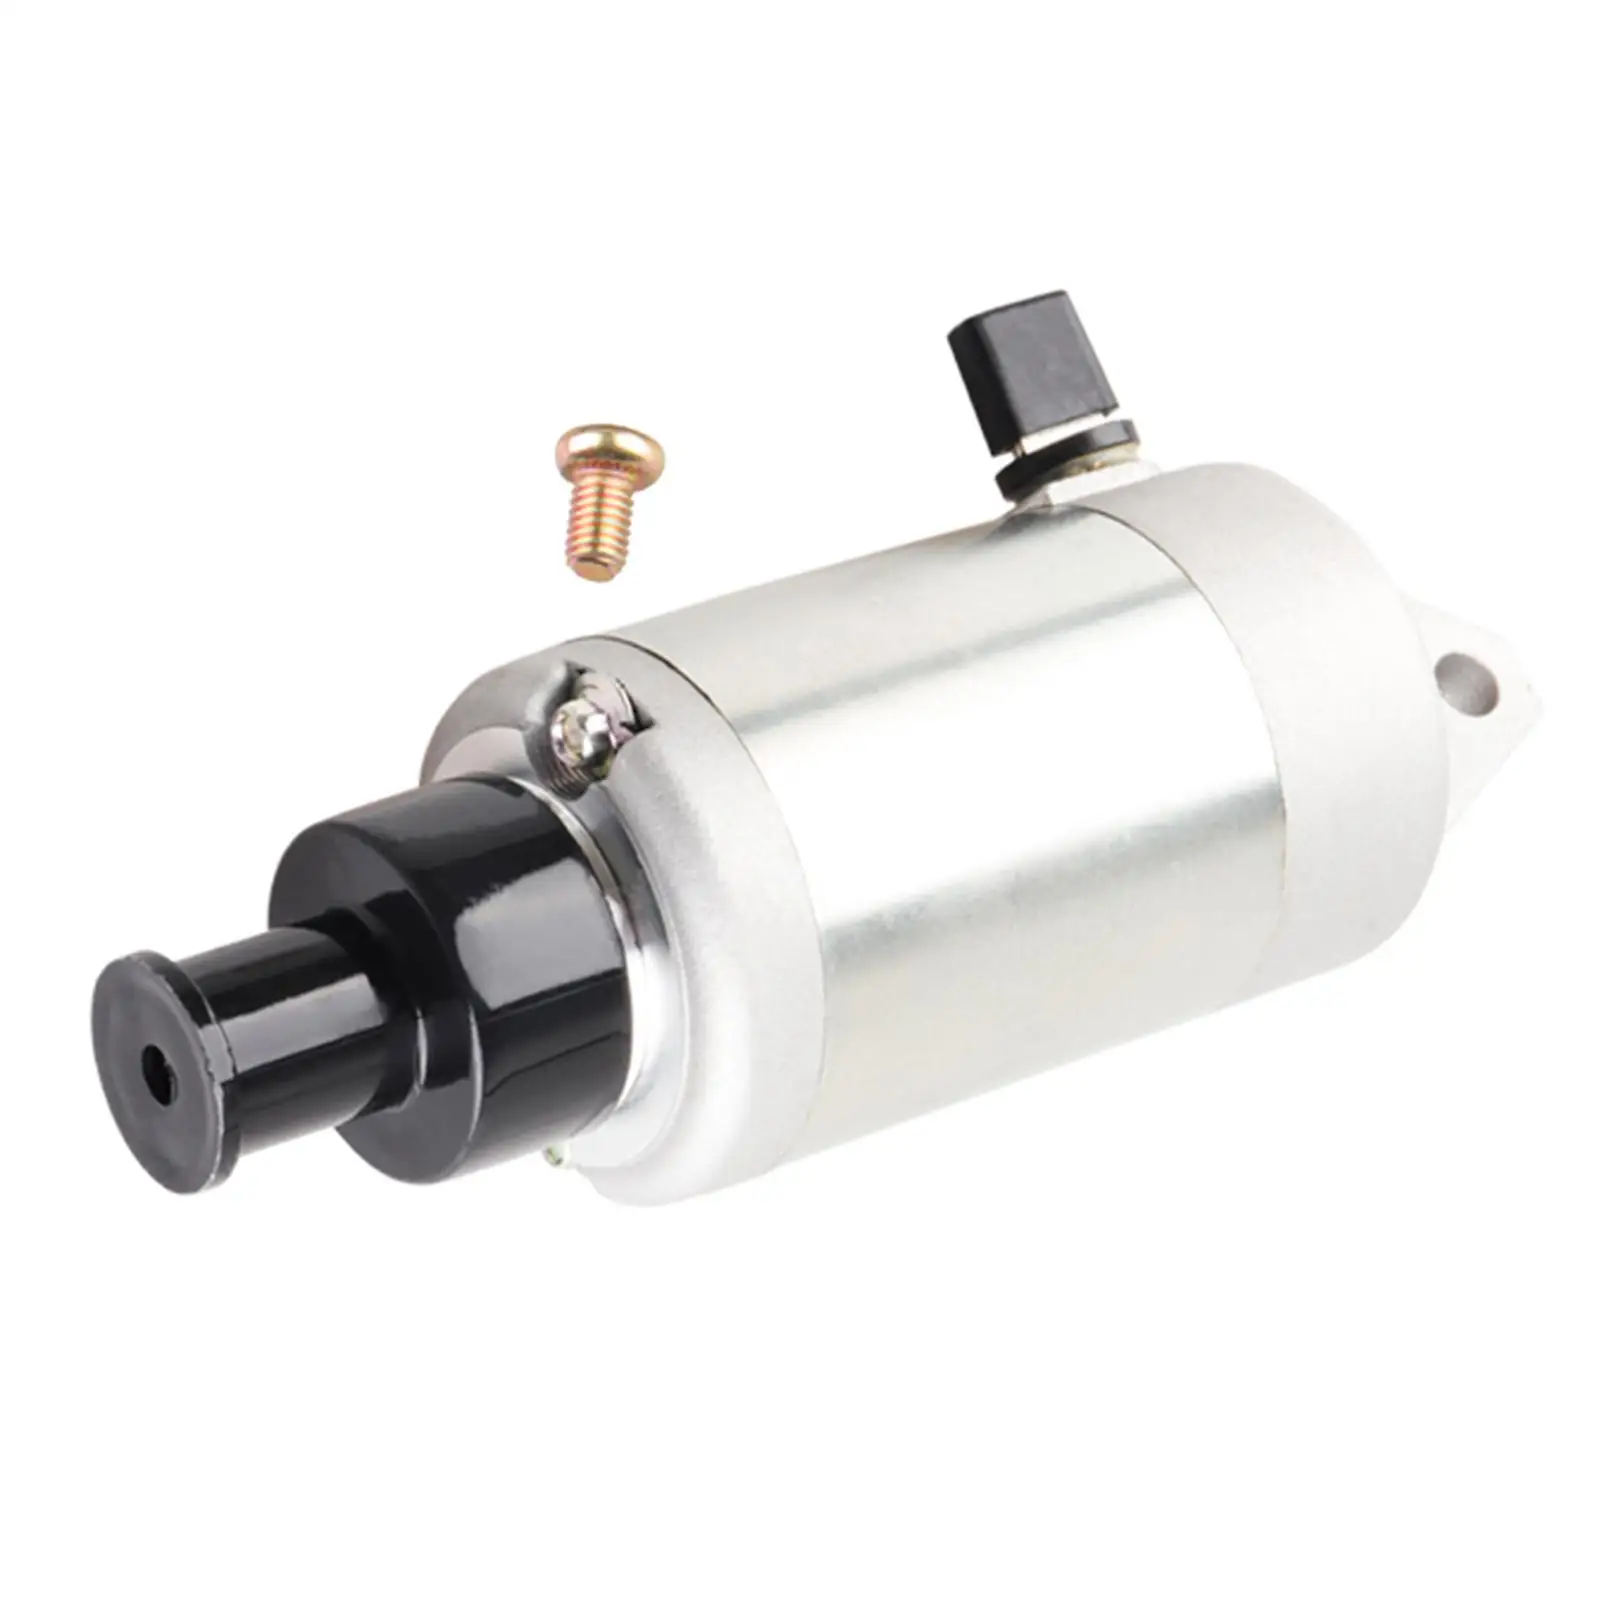 Motorcycle Starter Motor 2GB-81890-00 Easy Installation Replace Parts High Performance for Yamaha Yz250FX Yz250F 2015-2019